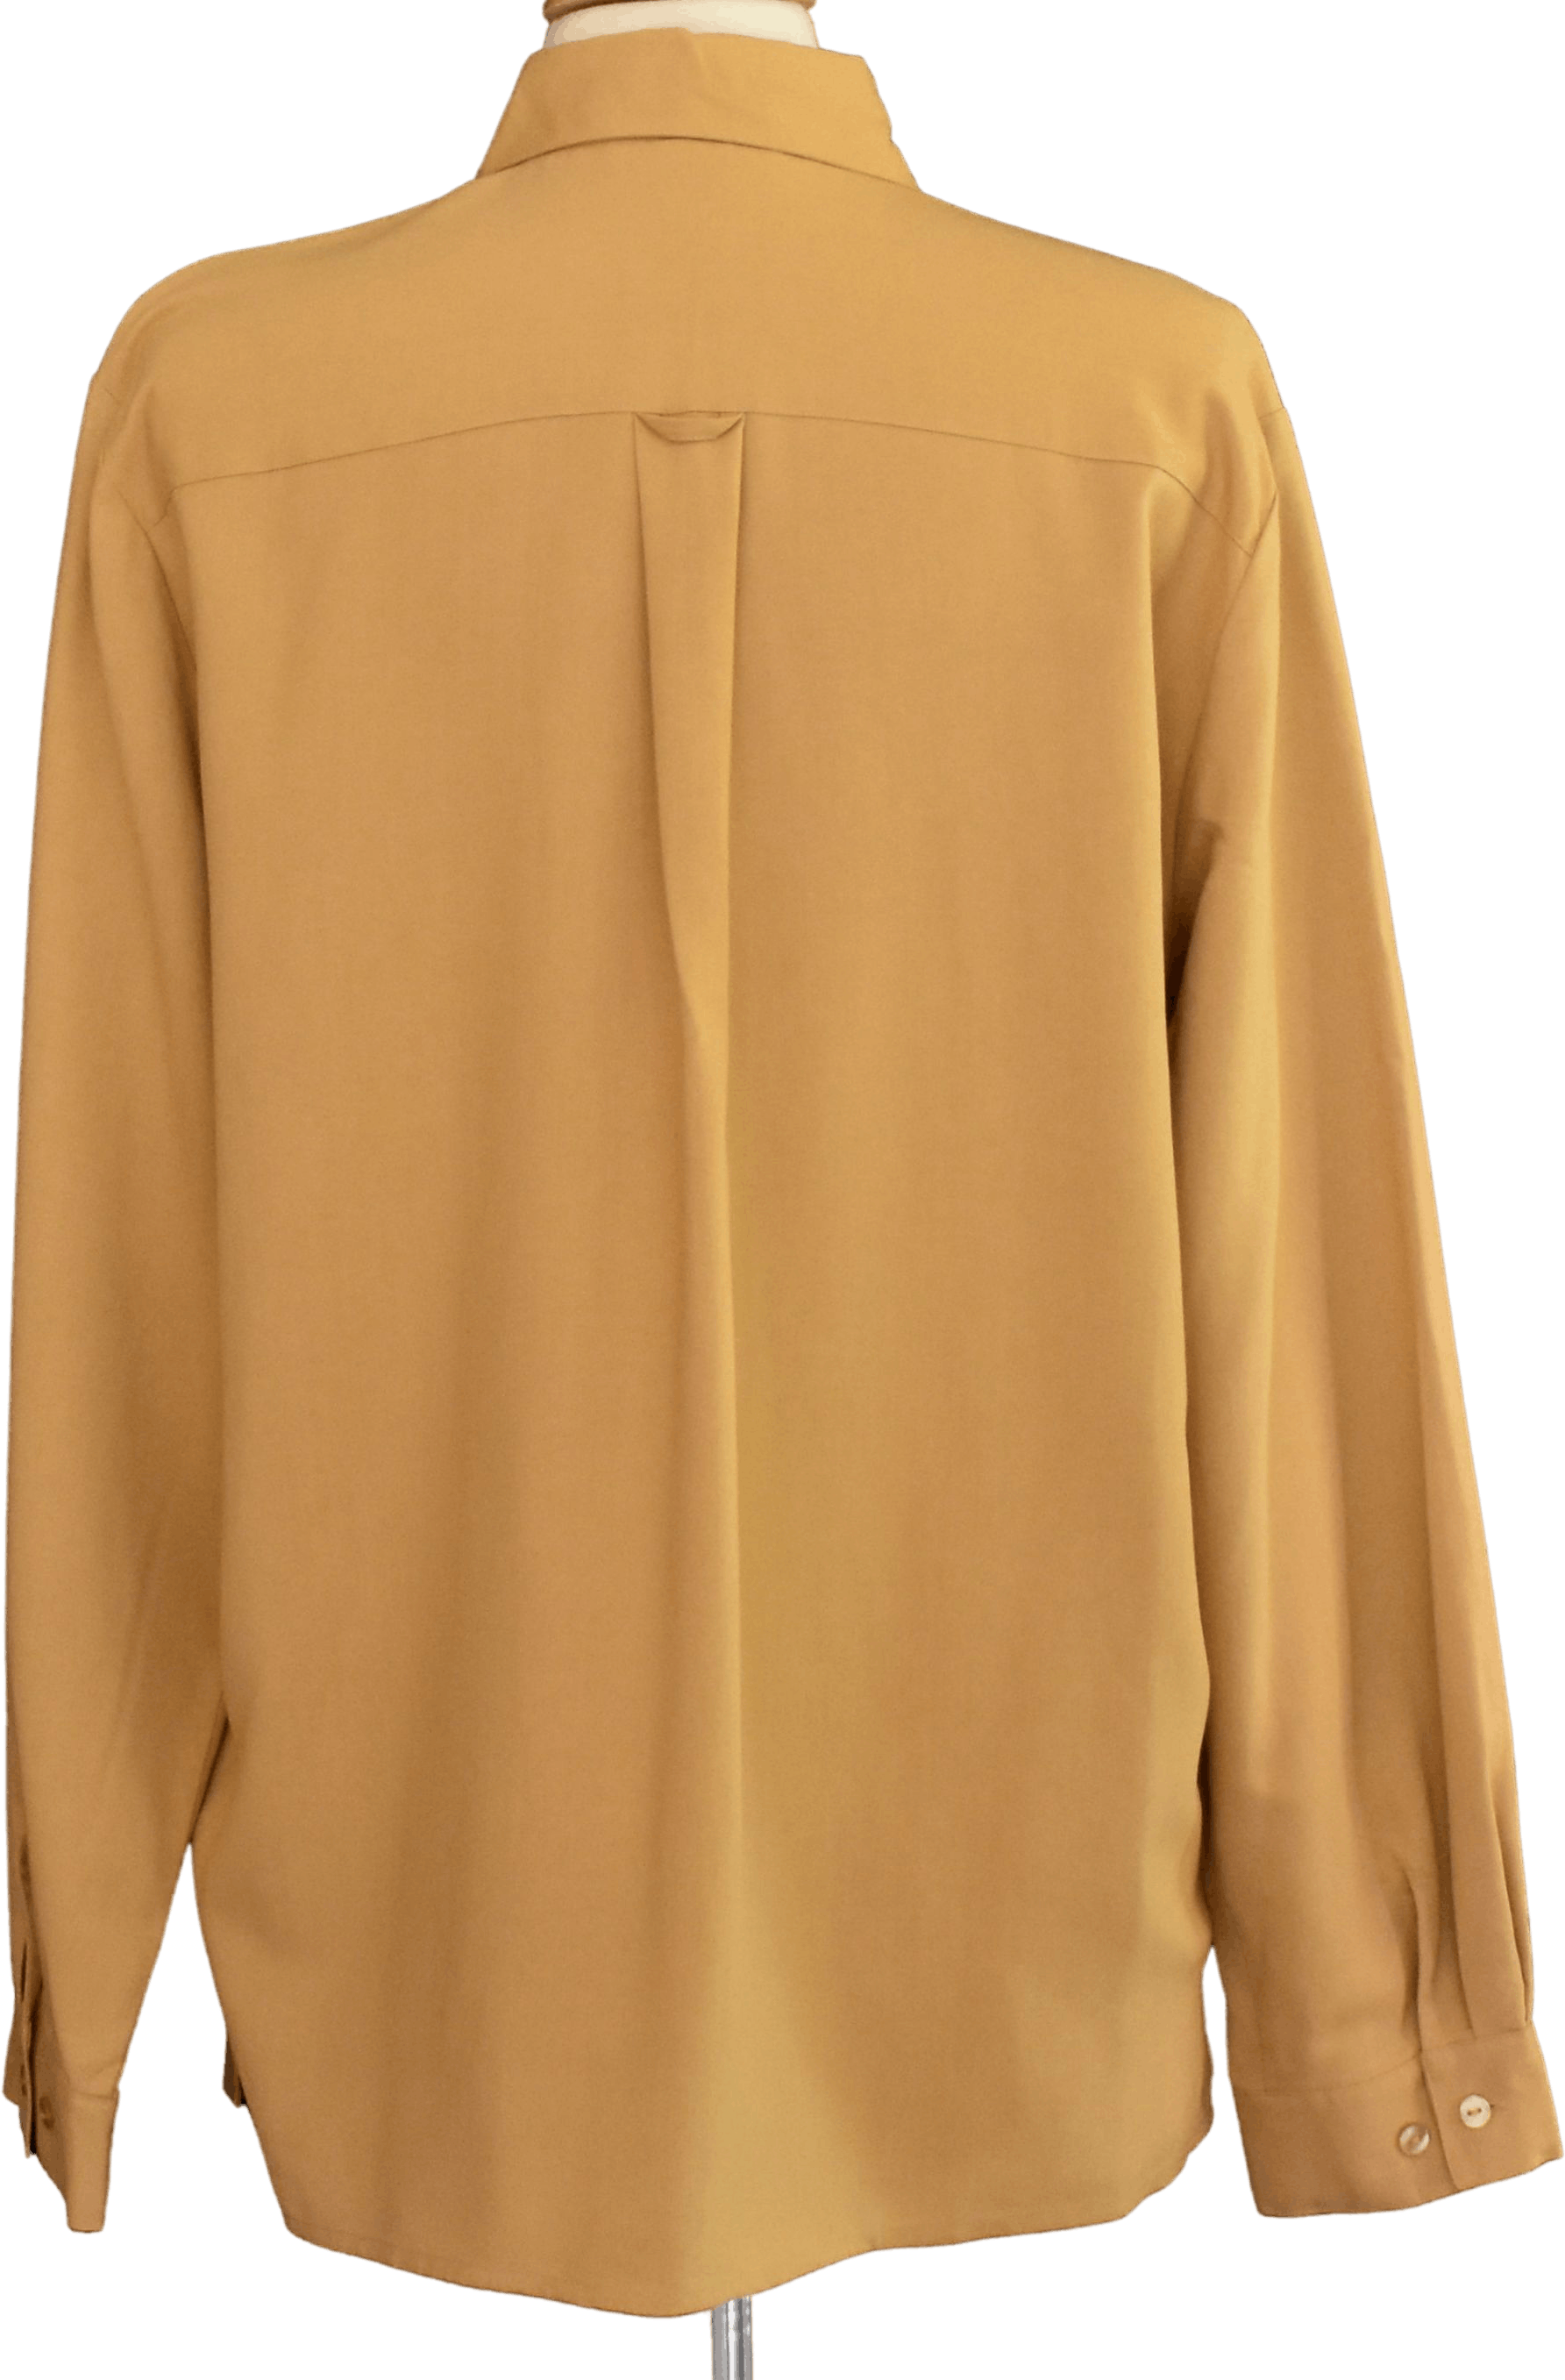 Vintage 90's Mustard Yellow Minimal Silk Blouse by Anna And Frank ...